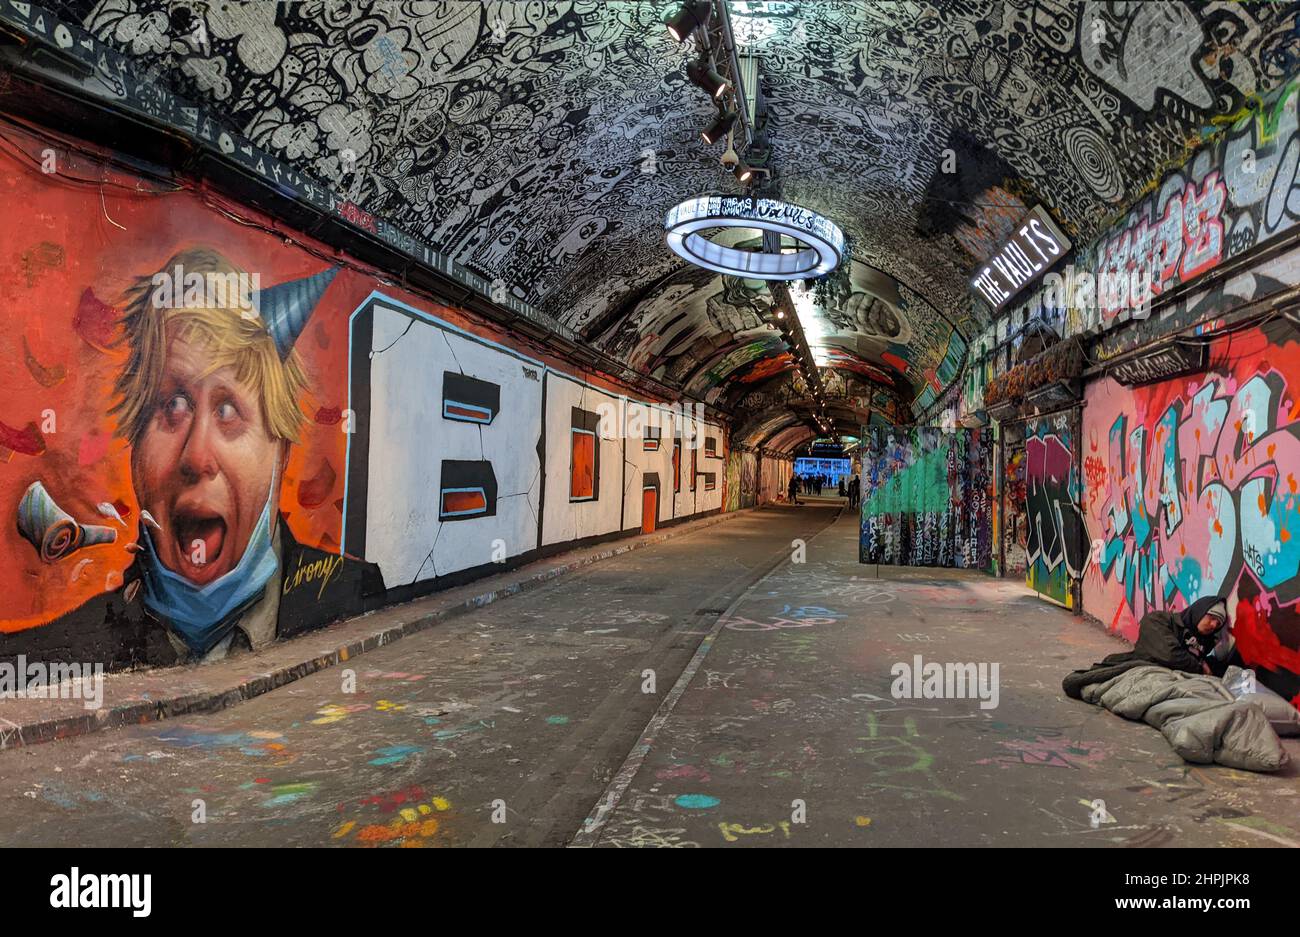 Graffiti depicting the UK Prime Minister Boris Johnson having a party contrasts with a homeless person sleeping rough on the pavement opposite Stock Photo